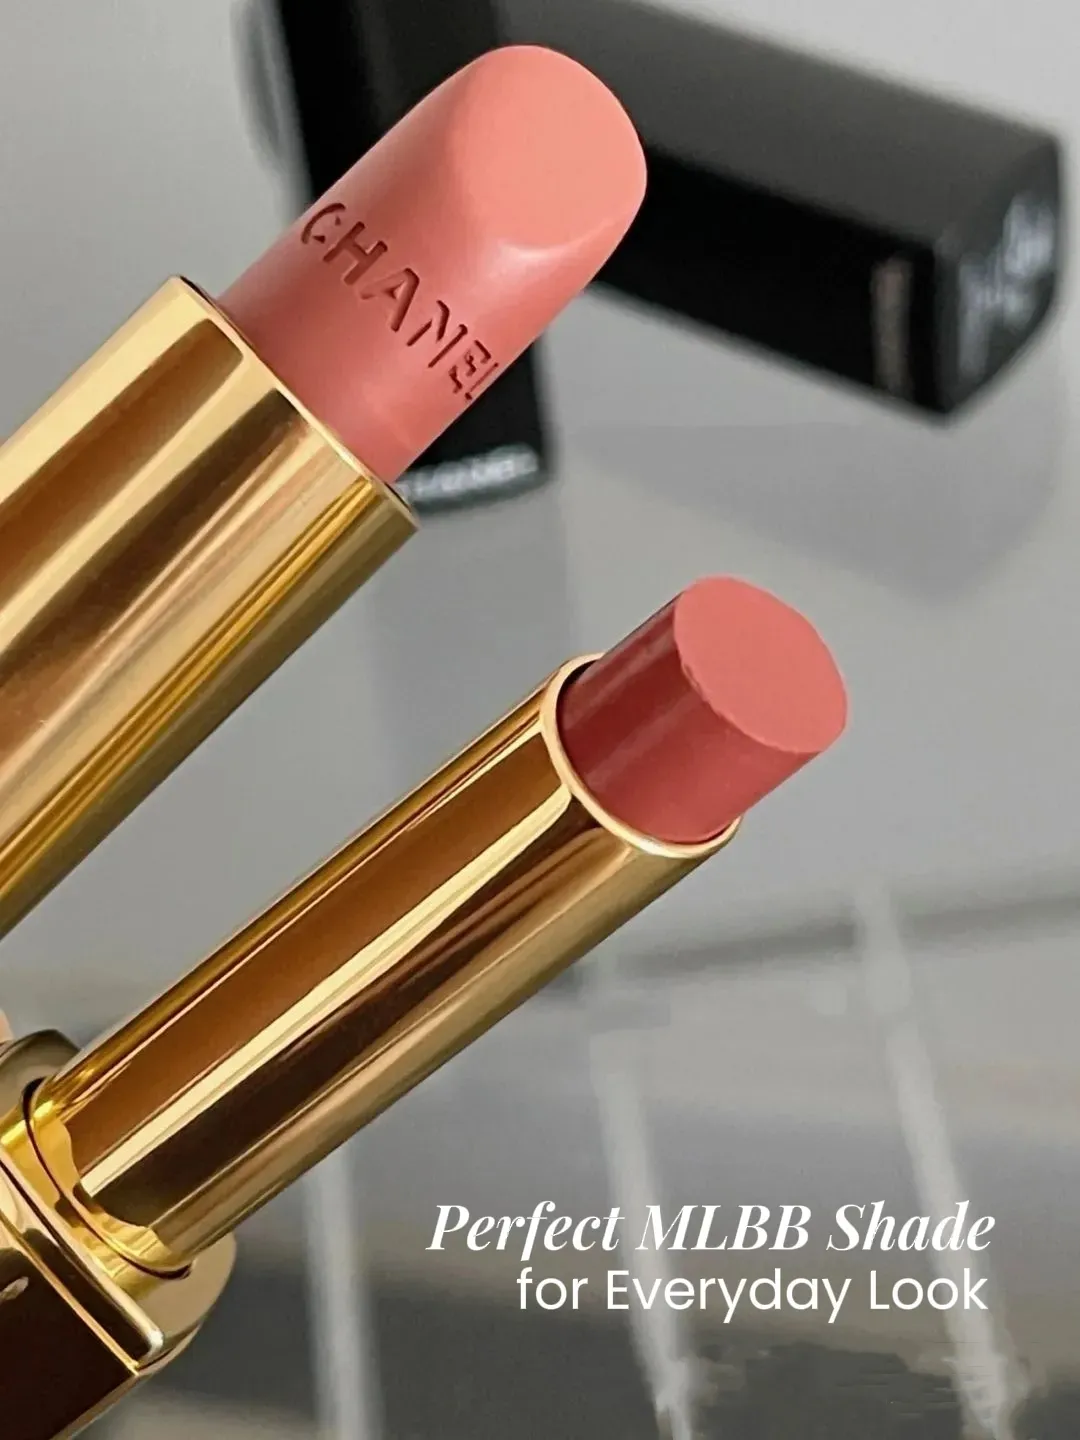 A 'milk tea' lipstick shade? A local cosmetics brand just released it as  part of 'Nude-Ish' collection